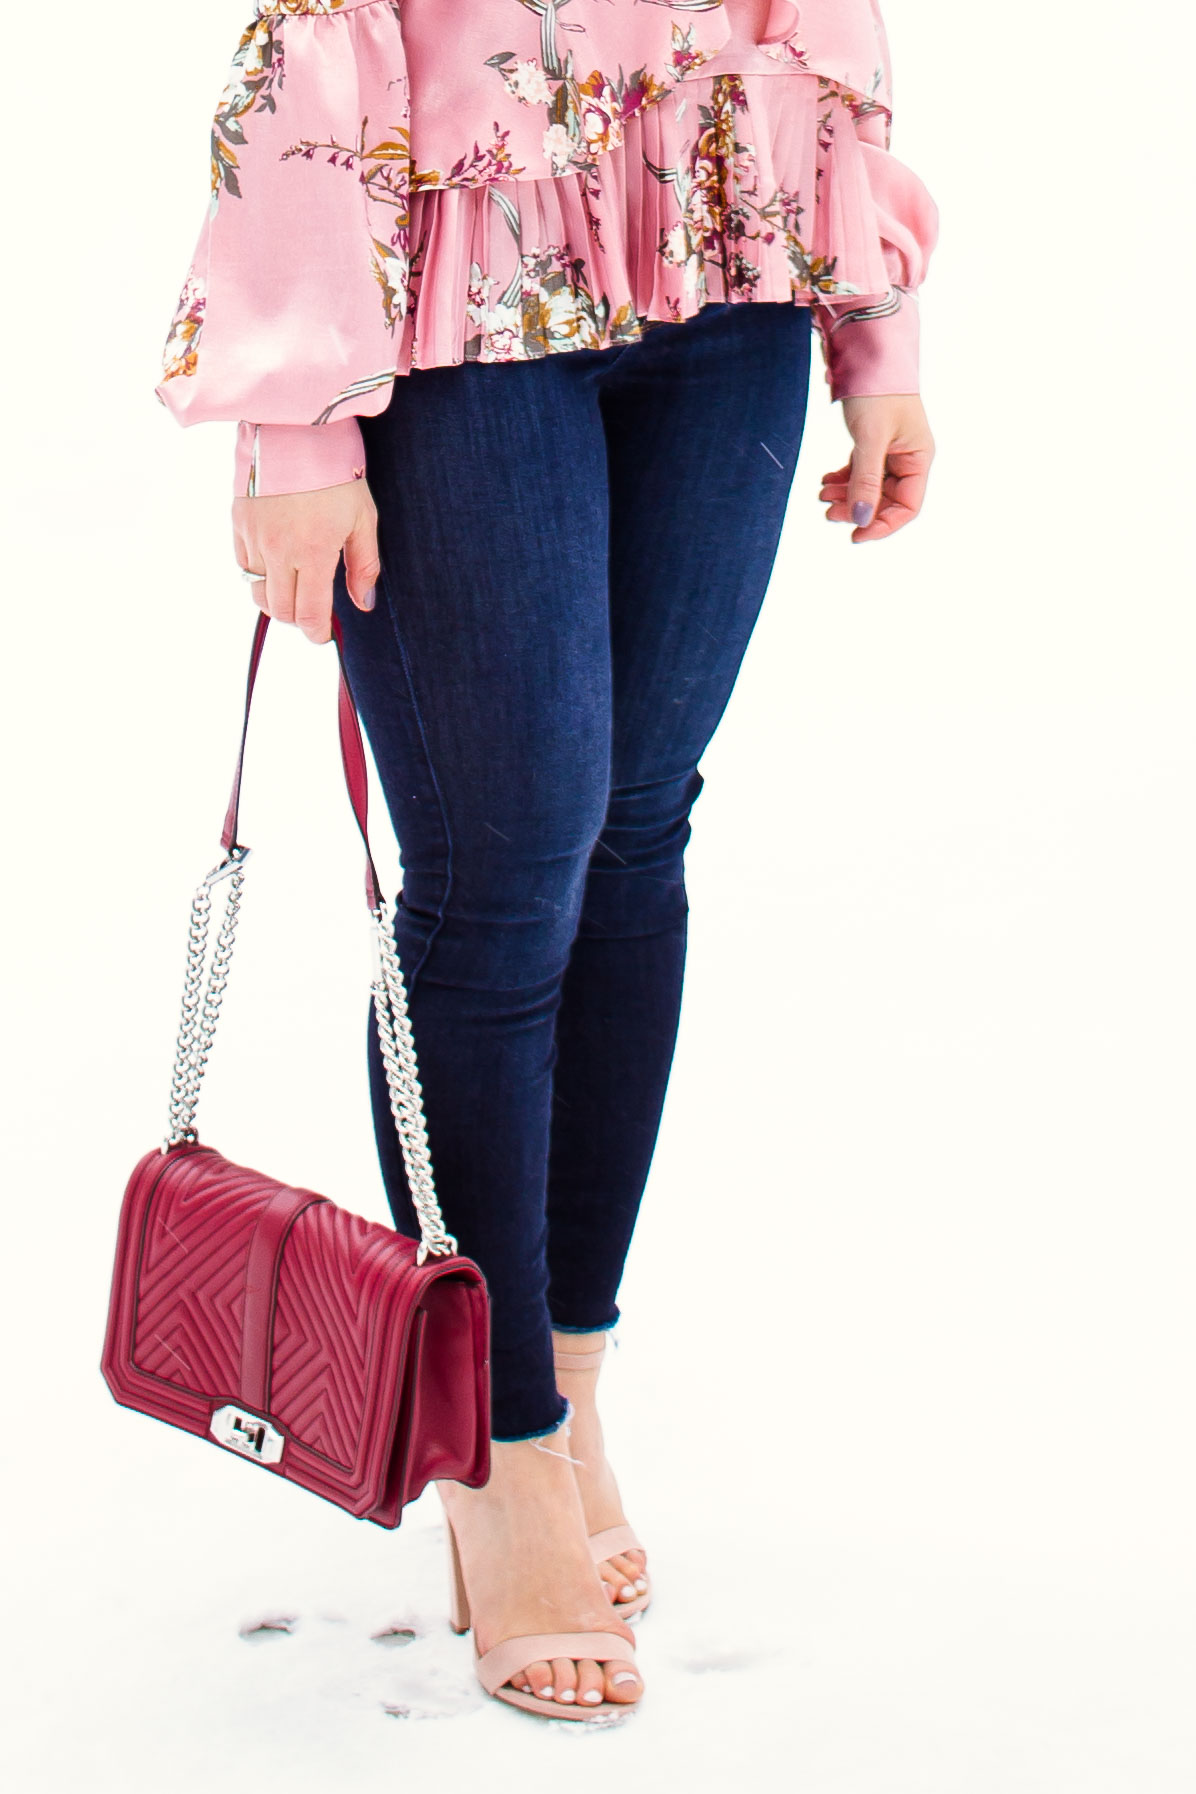 Valentines Day Outfit styled by top US fashion blog, Glass of Glam: image of a woman wearing a Leith floral top, Mott and Bow skinny jeans, JustFab heels, and a Rebecca Minkoff crossbody bag